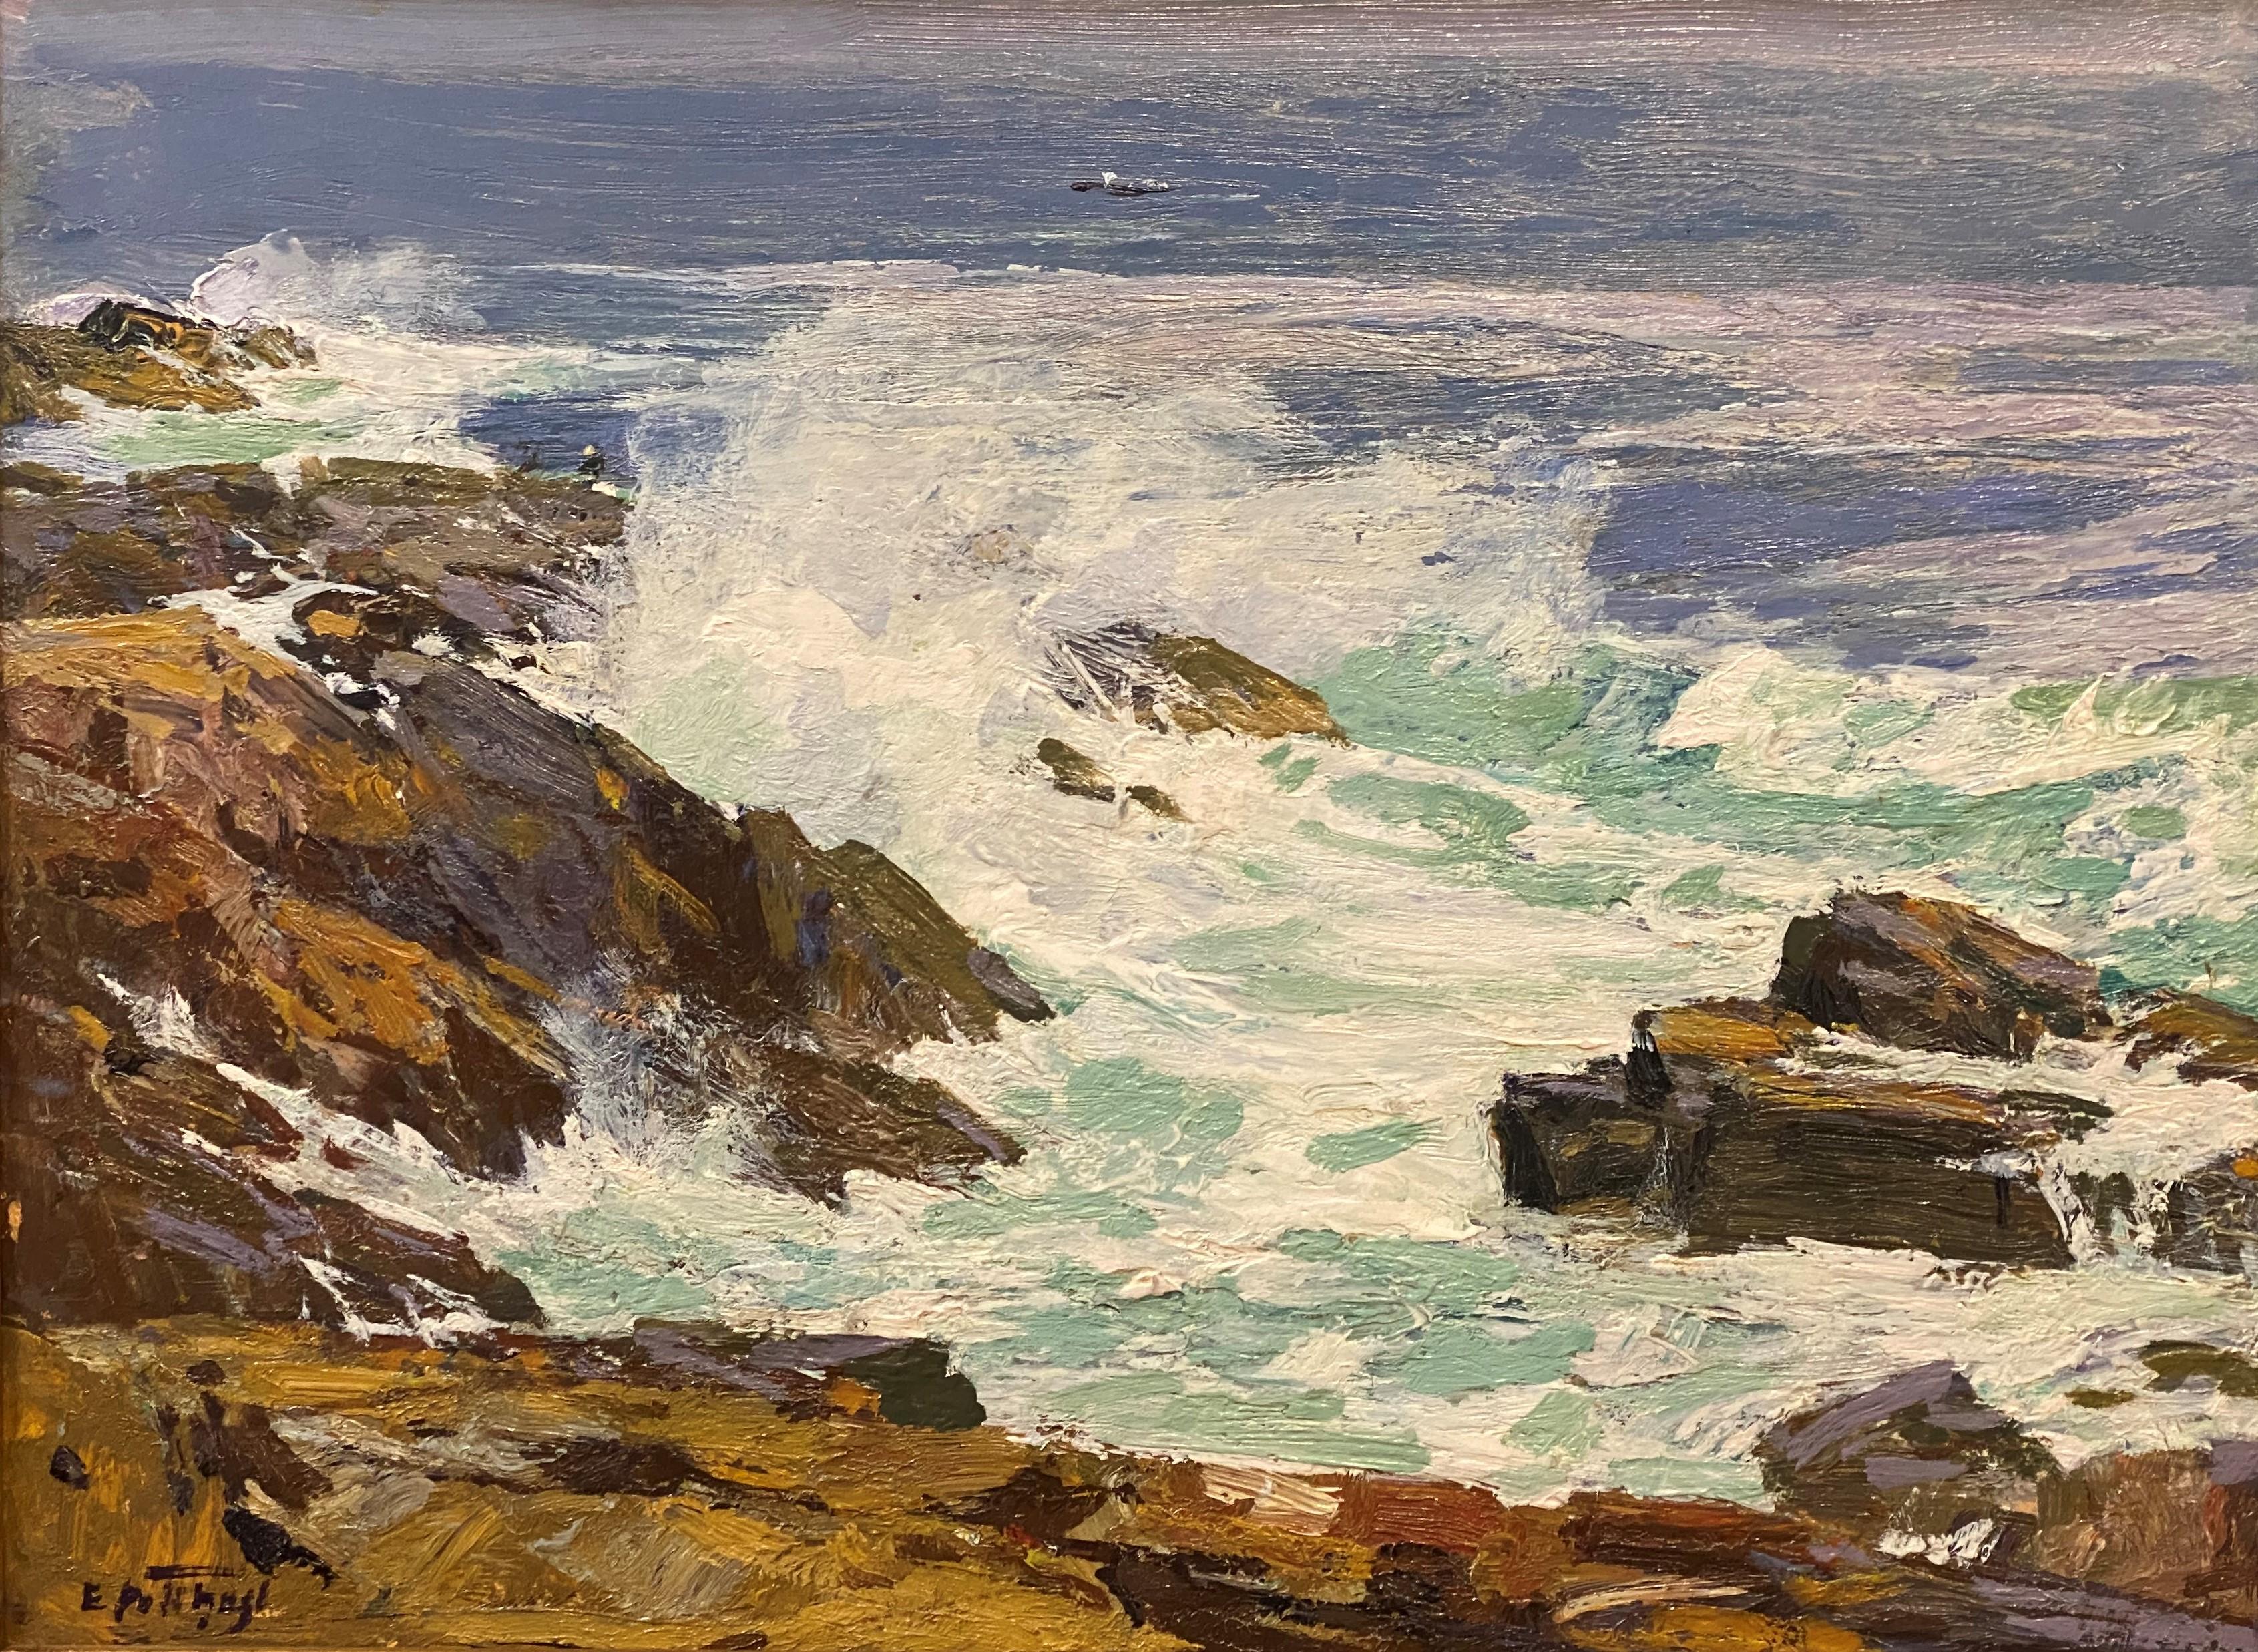 Breaking Wave - Painting by Edward Henry Potthast